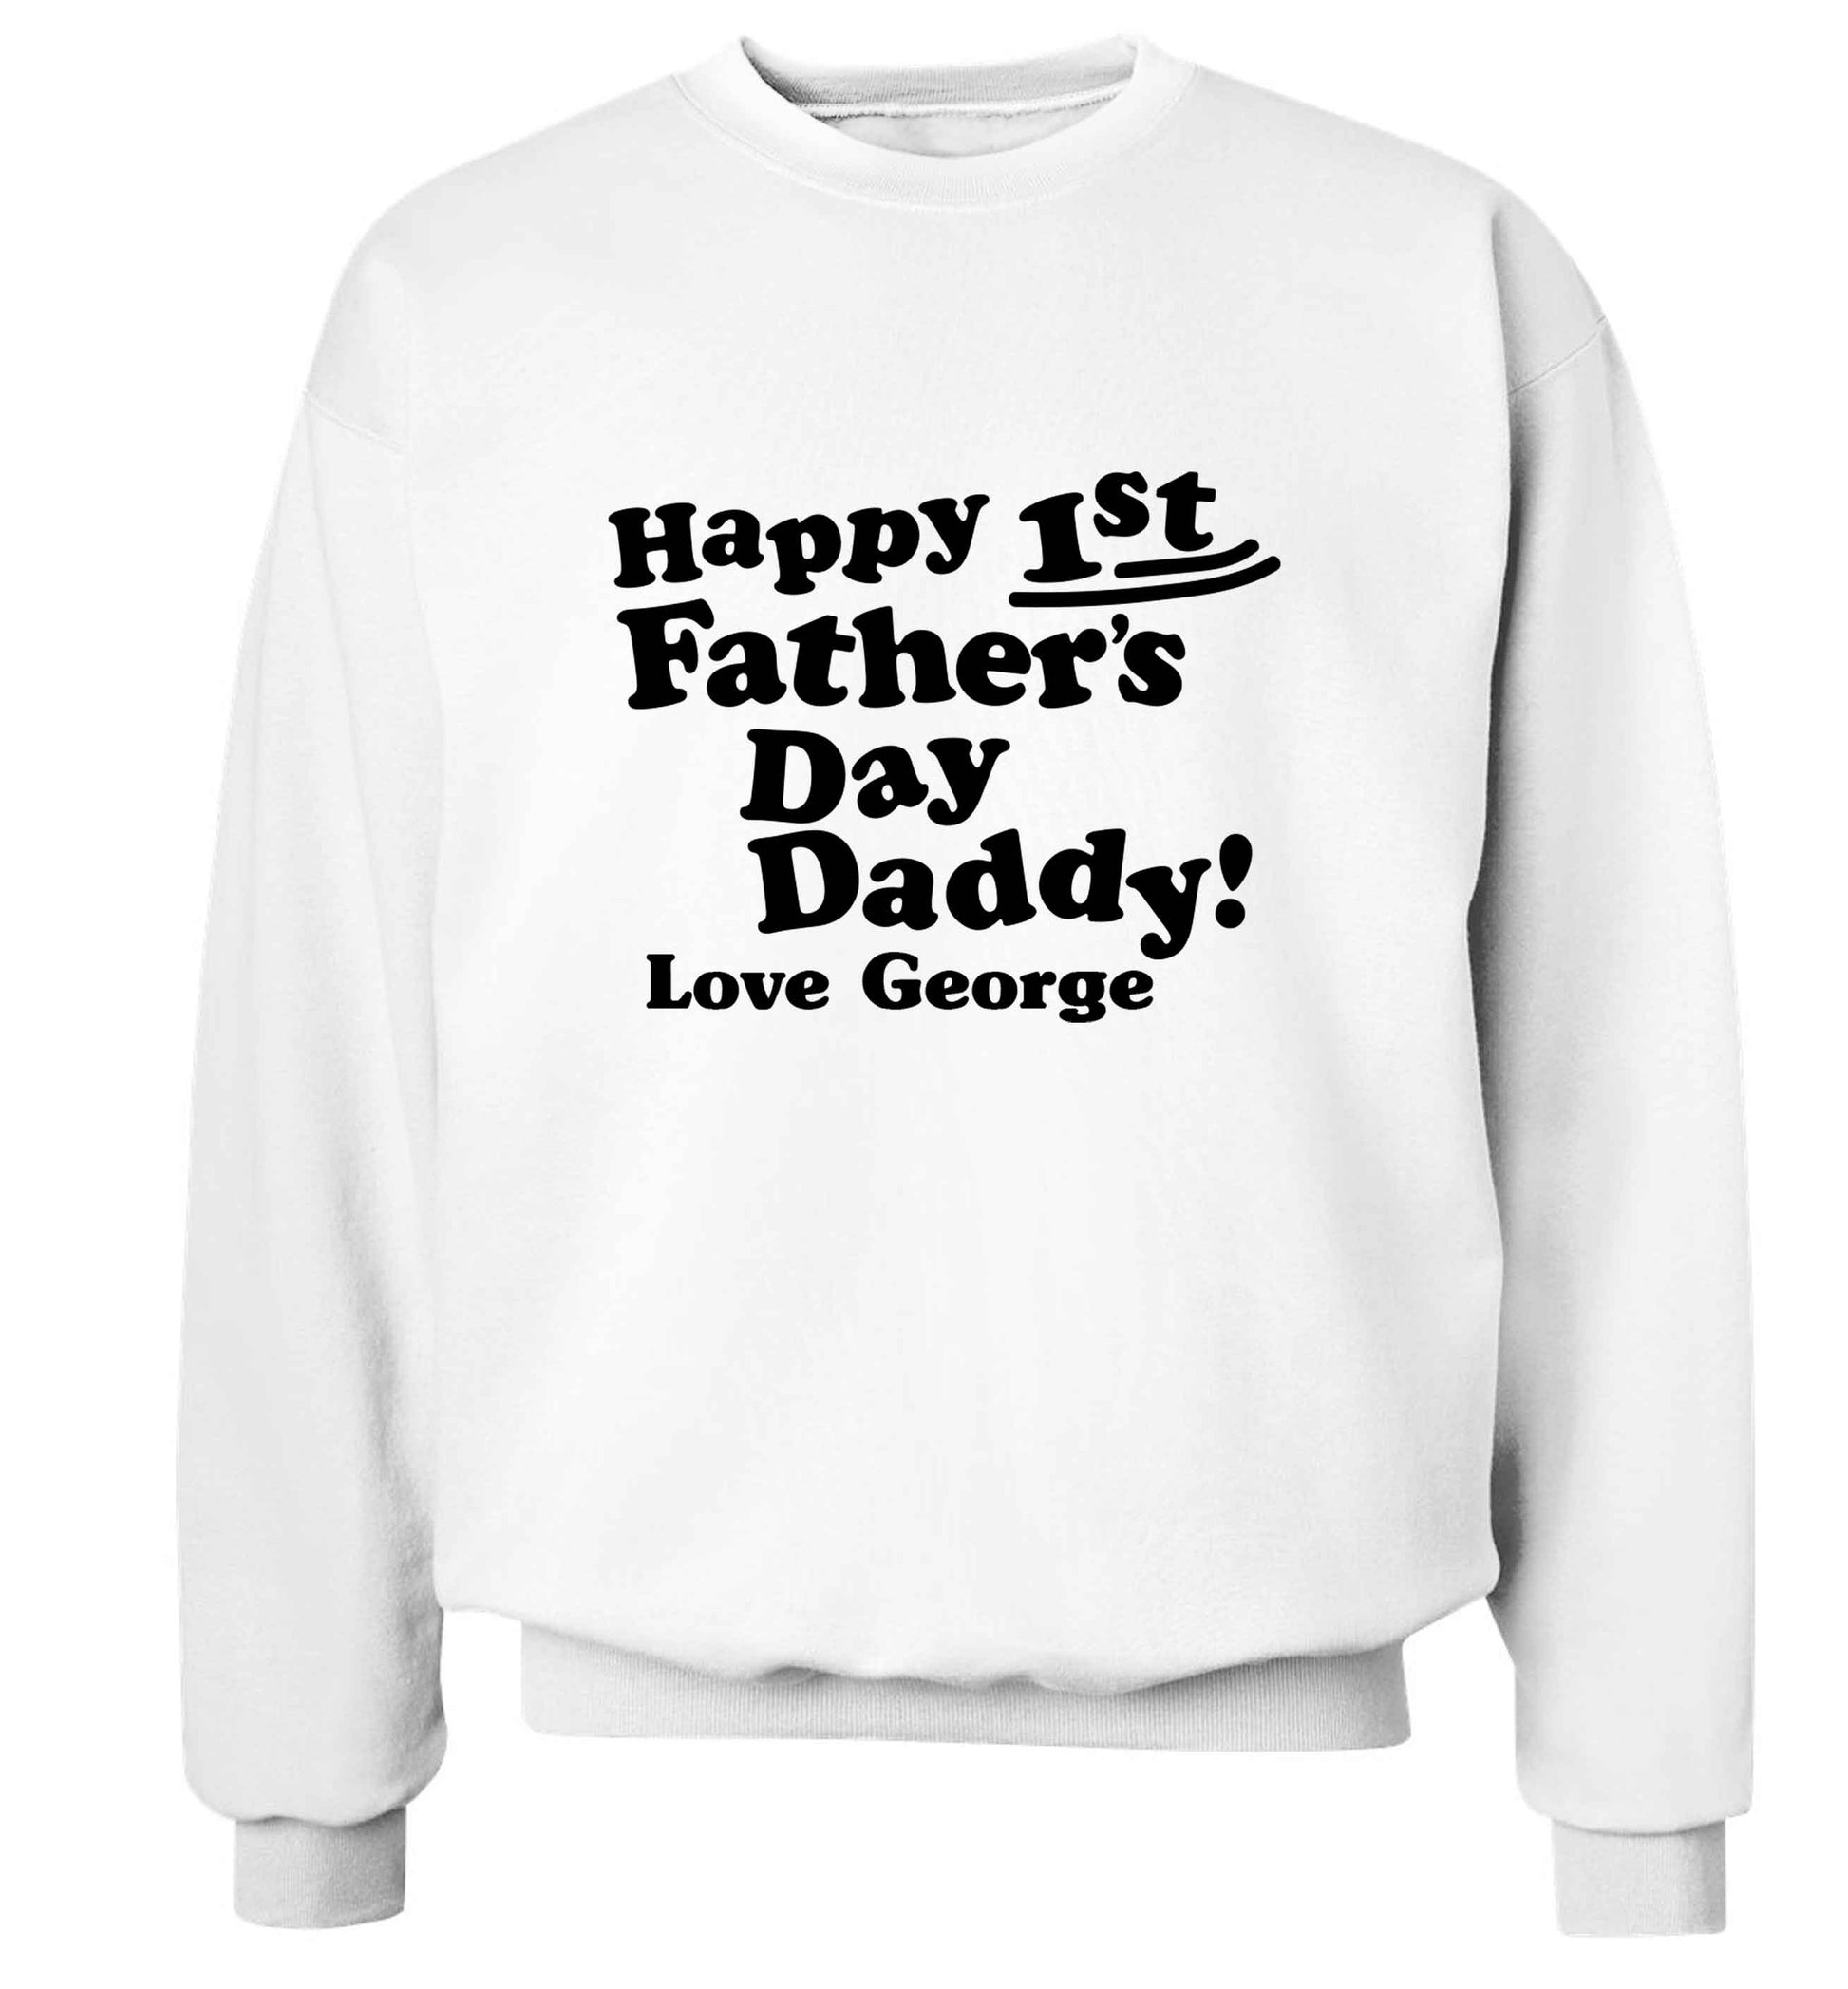 Happy first Fathers Day daddy love personalised adult's unisex white sweater 2XL